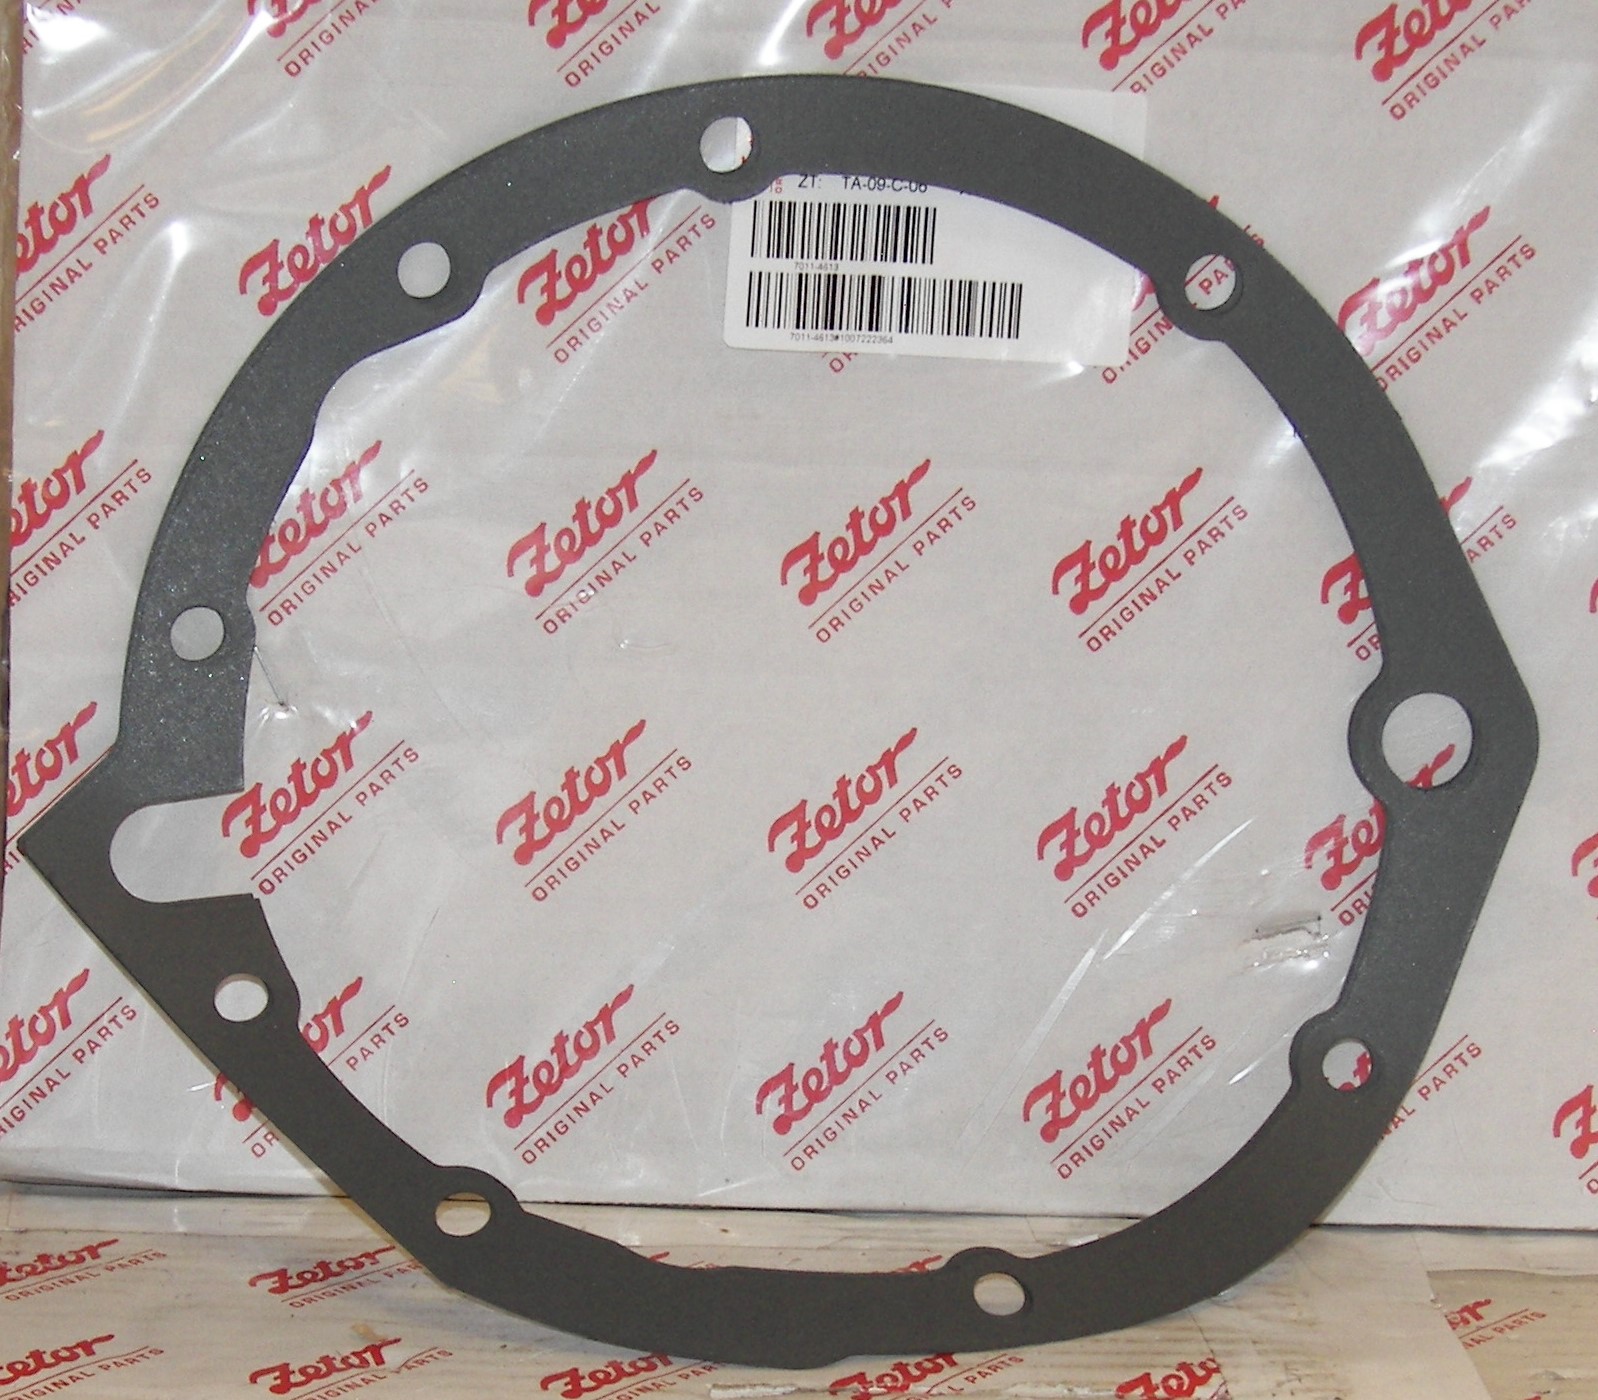 GASKET FOR ROUND BOTTOM COVER ON DIFFERENTIAL HOUSING